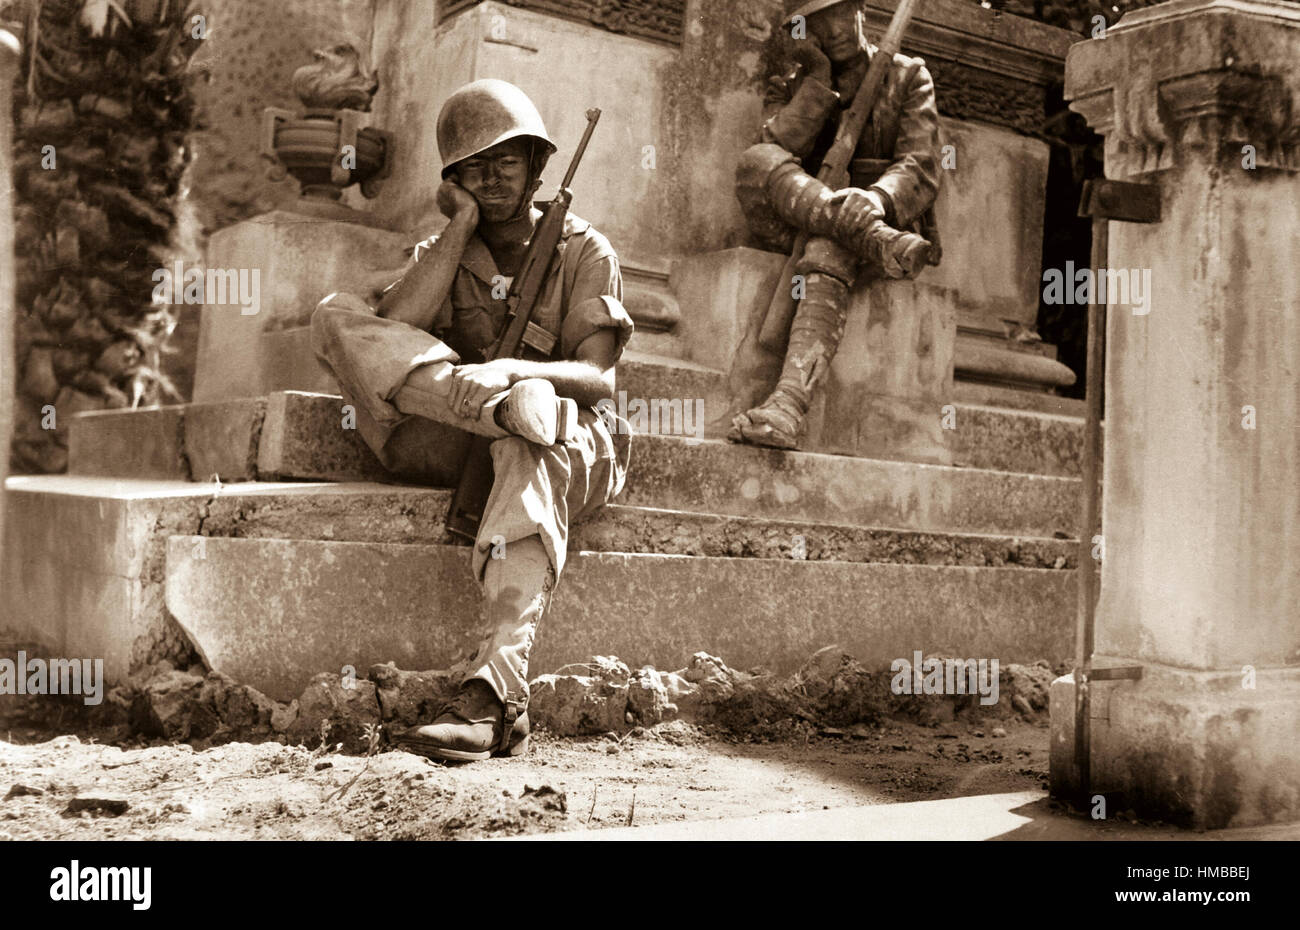 Sgt. Norwood Dorman, Benson, N.C., stops to rest at the memorial to the Italian soldier of World War I, Brolo, Sicily.  August 14, 1943.  Lt. Robert J. Longini. (Army) NARA FILE #:  111-SC-179879 WAR & CONFLICT BOOK #:  1026 Stock Photo